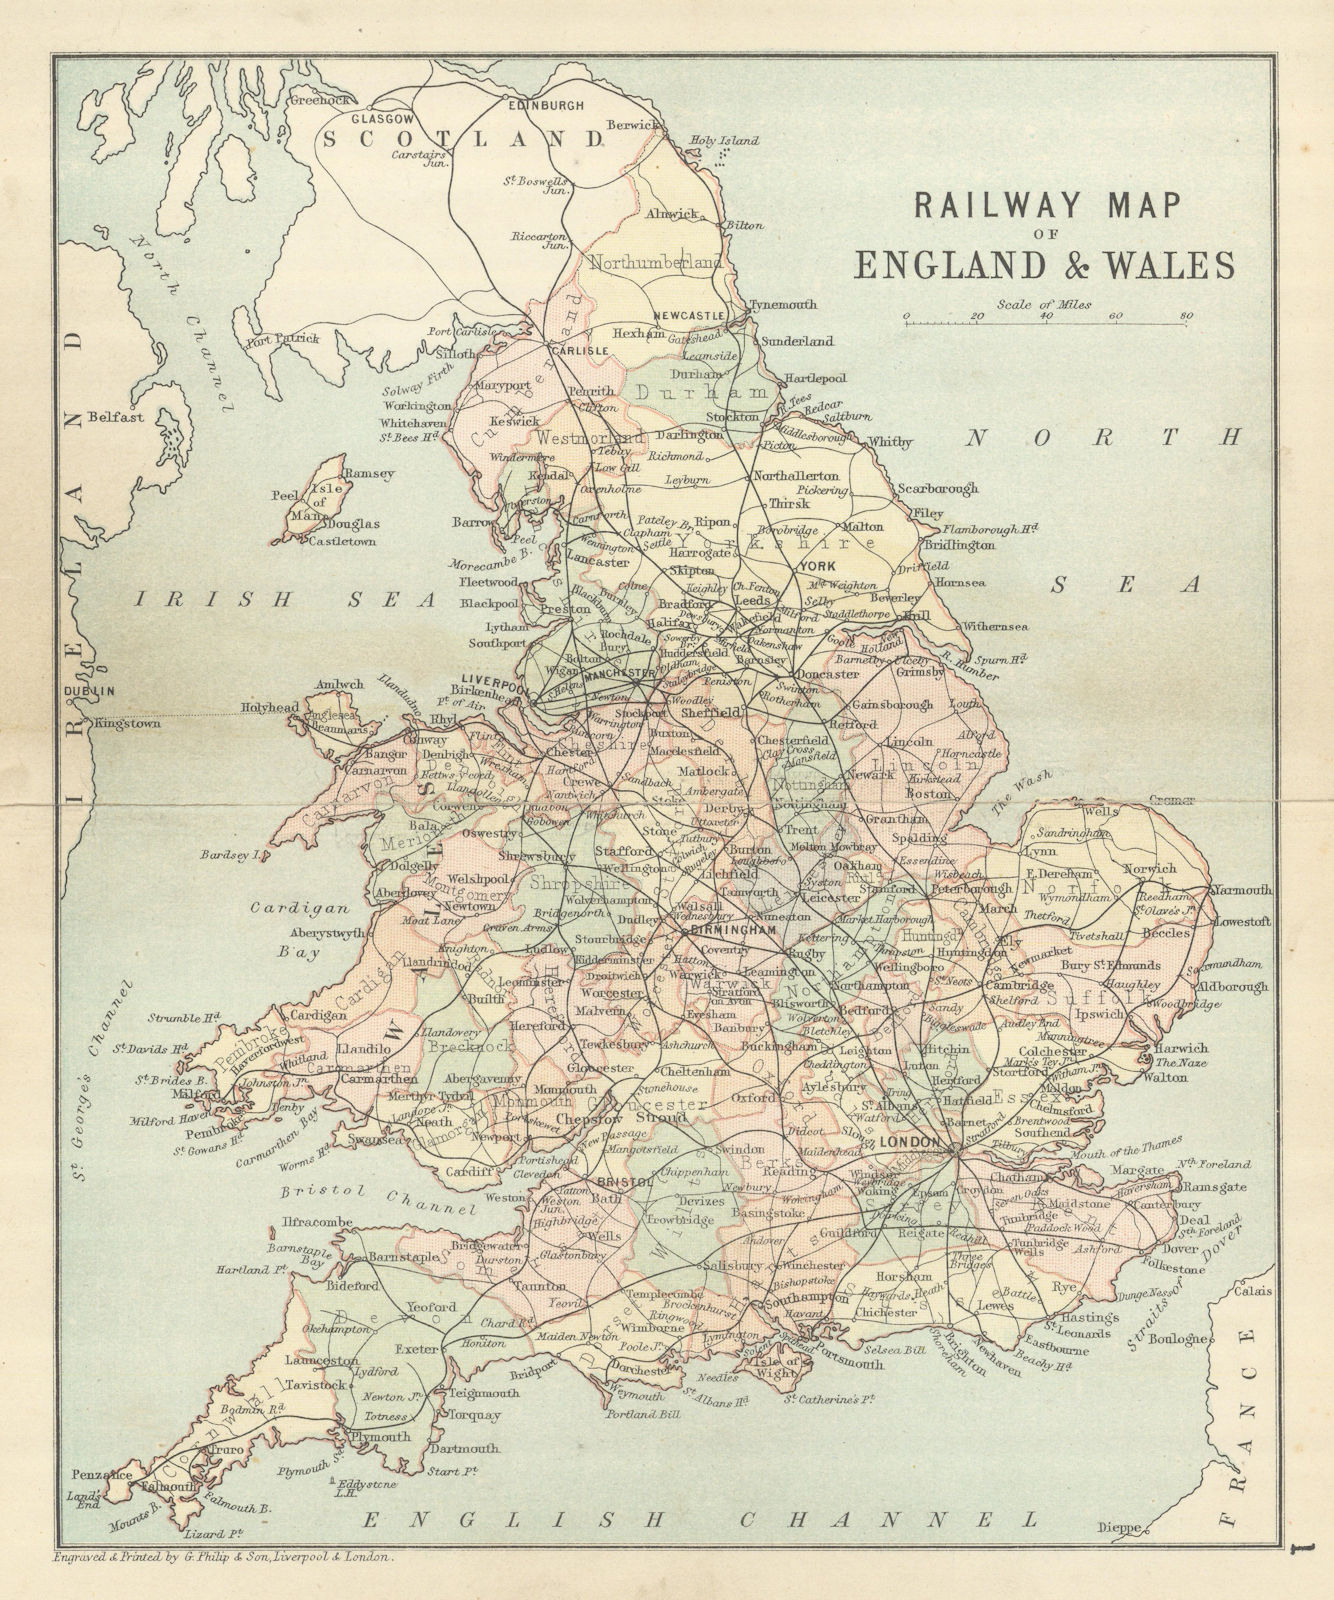 Associate Product GREAT BRITAIN RAILWAYS. Railway map of England & Wales. PHILIP 1889 old